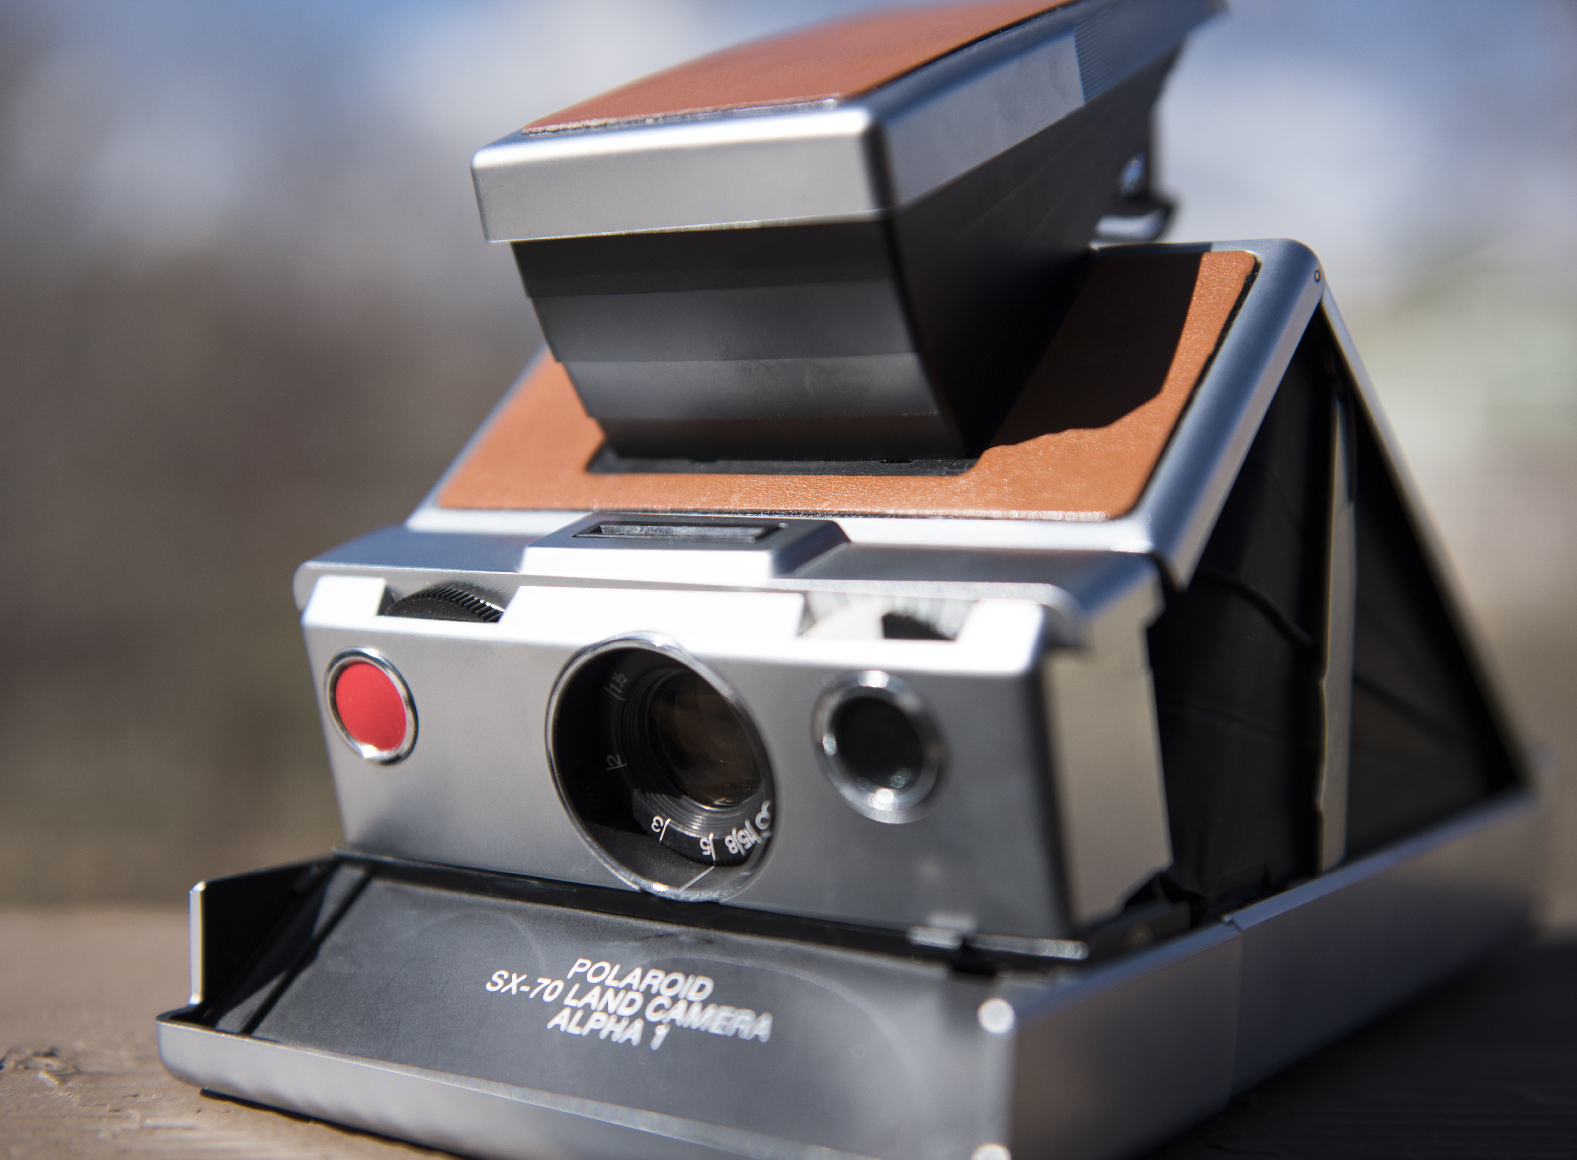 SX-70 Alpha 1 Totally Awesome Retro Leather Body!